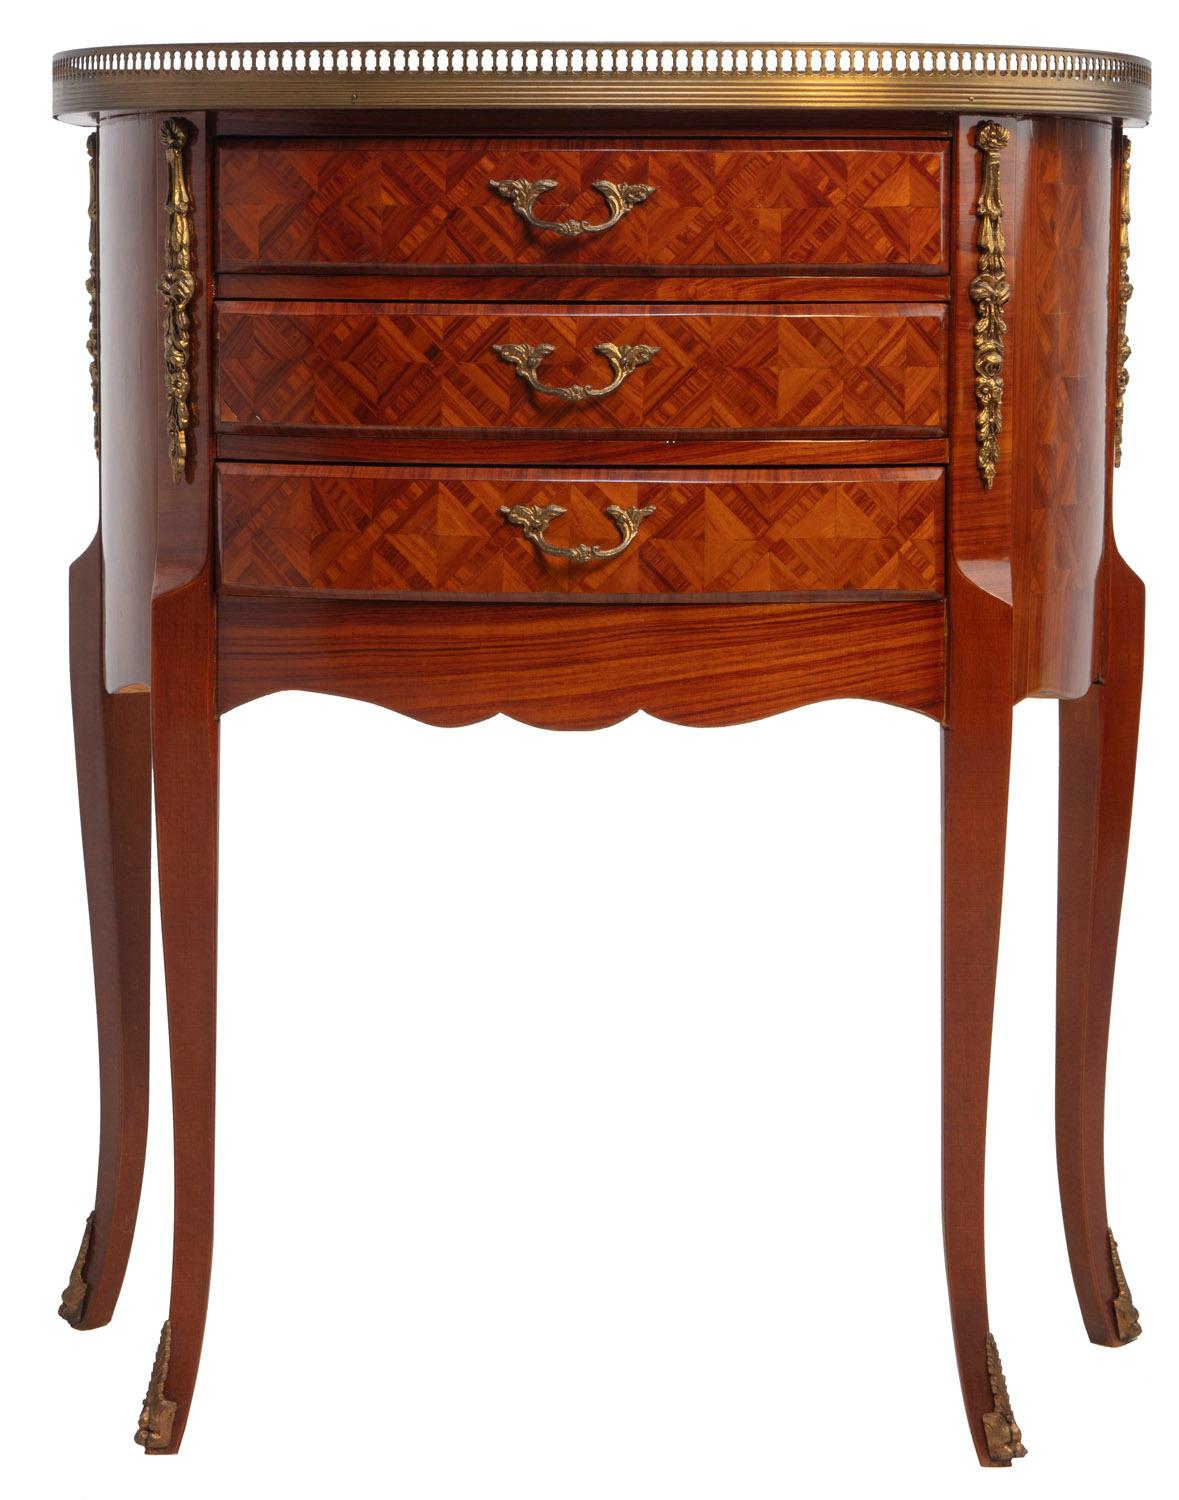 Pair of Louis XV marquetry side tables with cocktail gallery, brass hardware and ormolu.